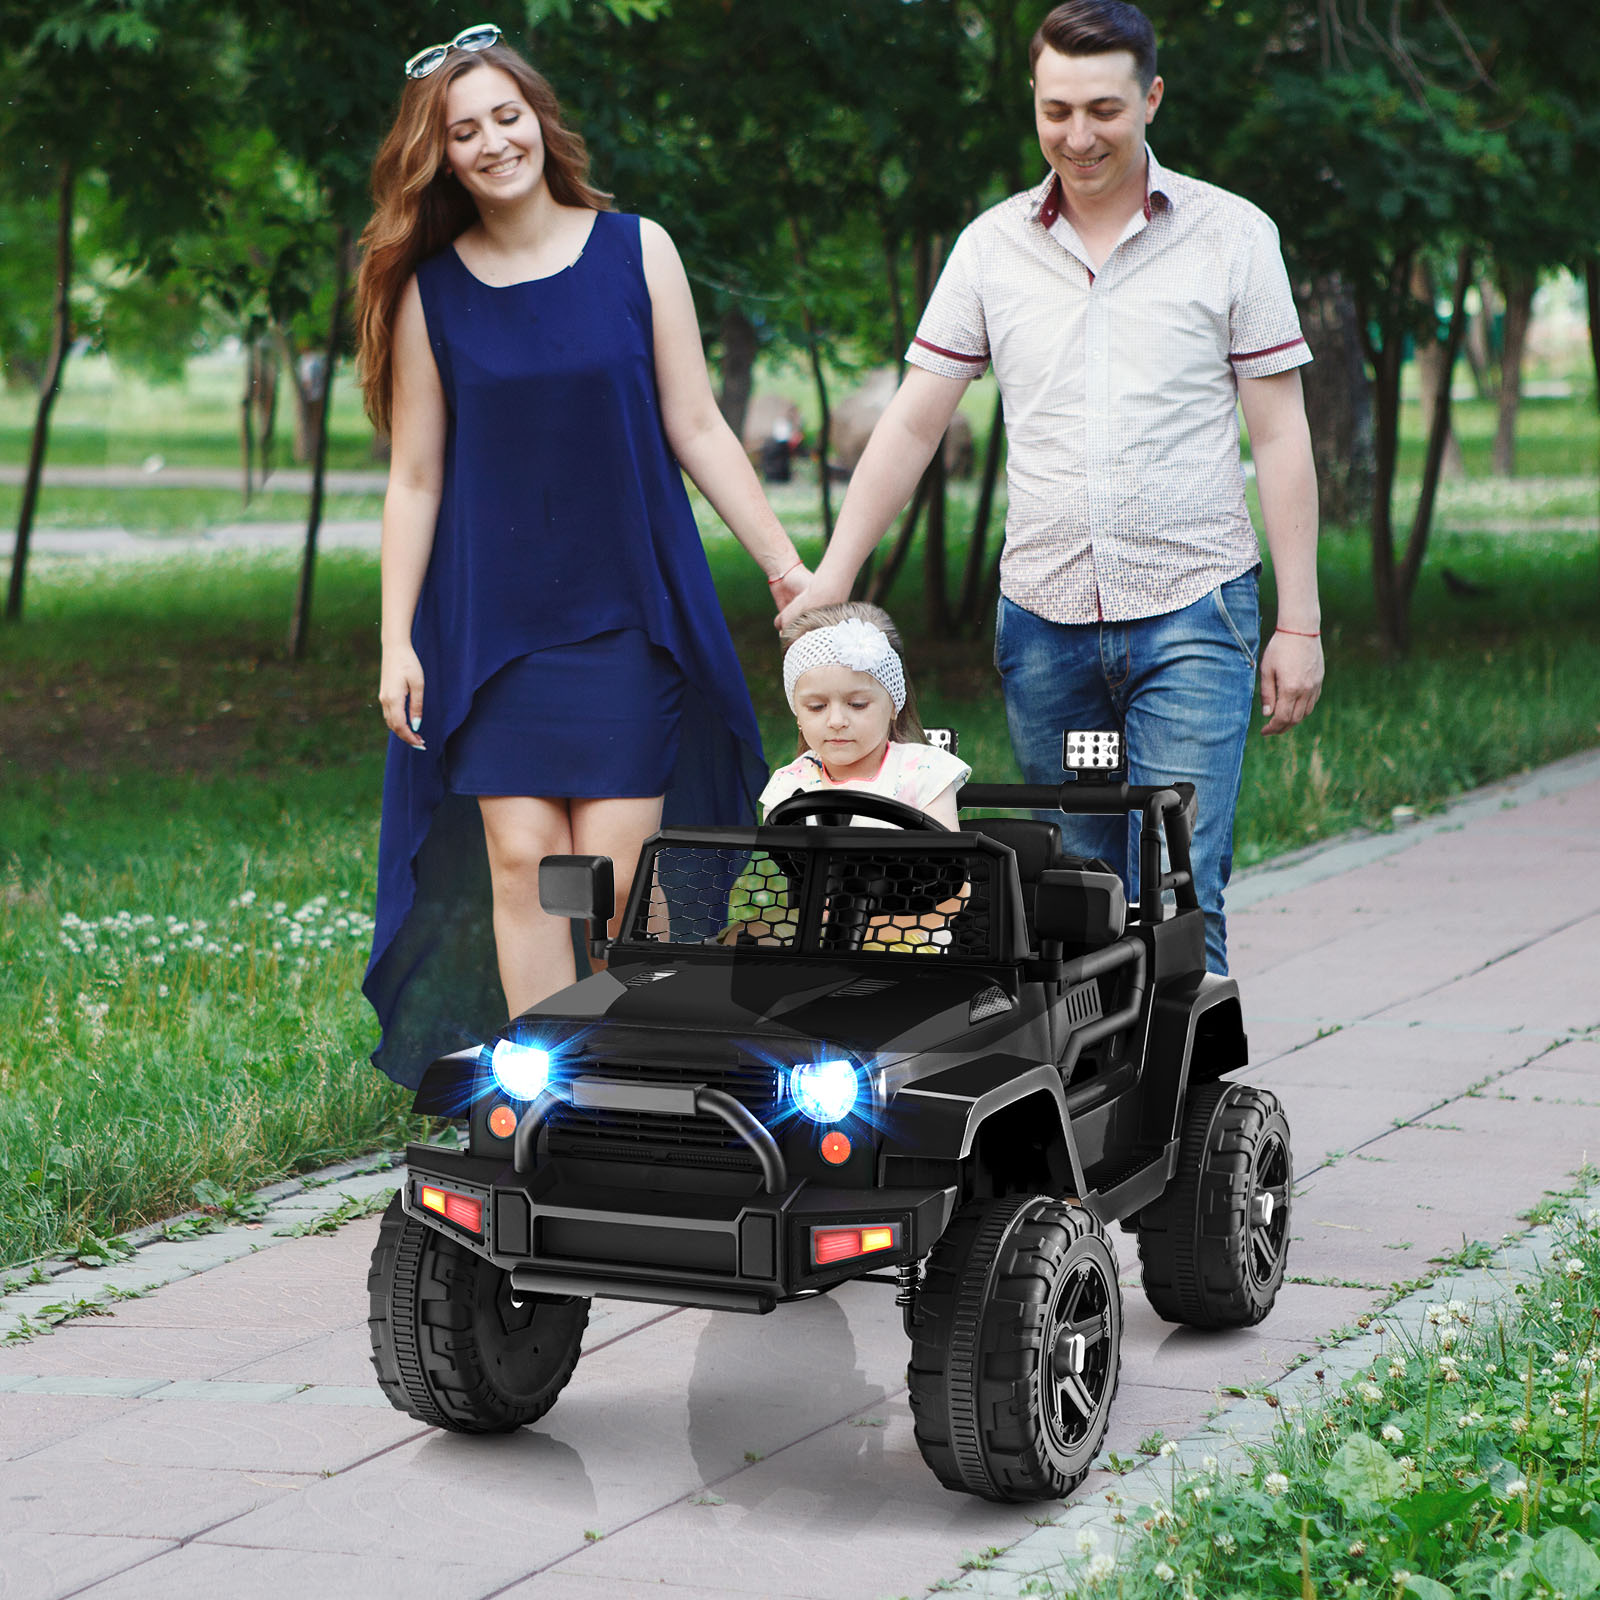 Topbuy 12V Kids Ride On Car Electric Vehicle Jeep with Parental Remote Music Horn Headlights Slow Start Function Black - image 2 of 10